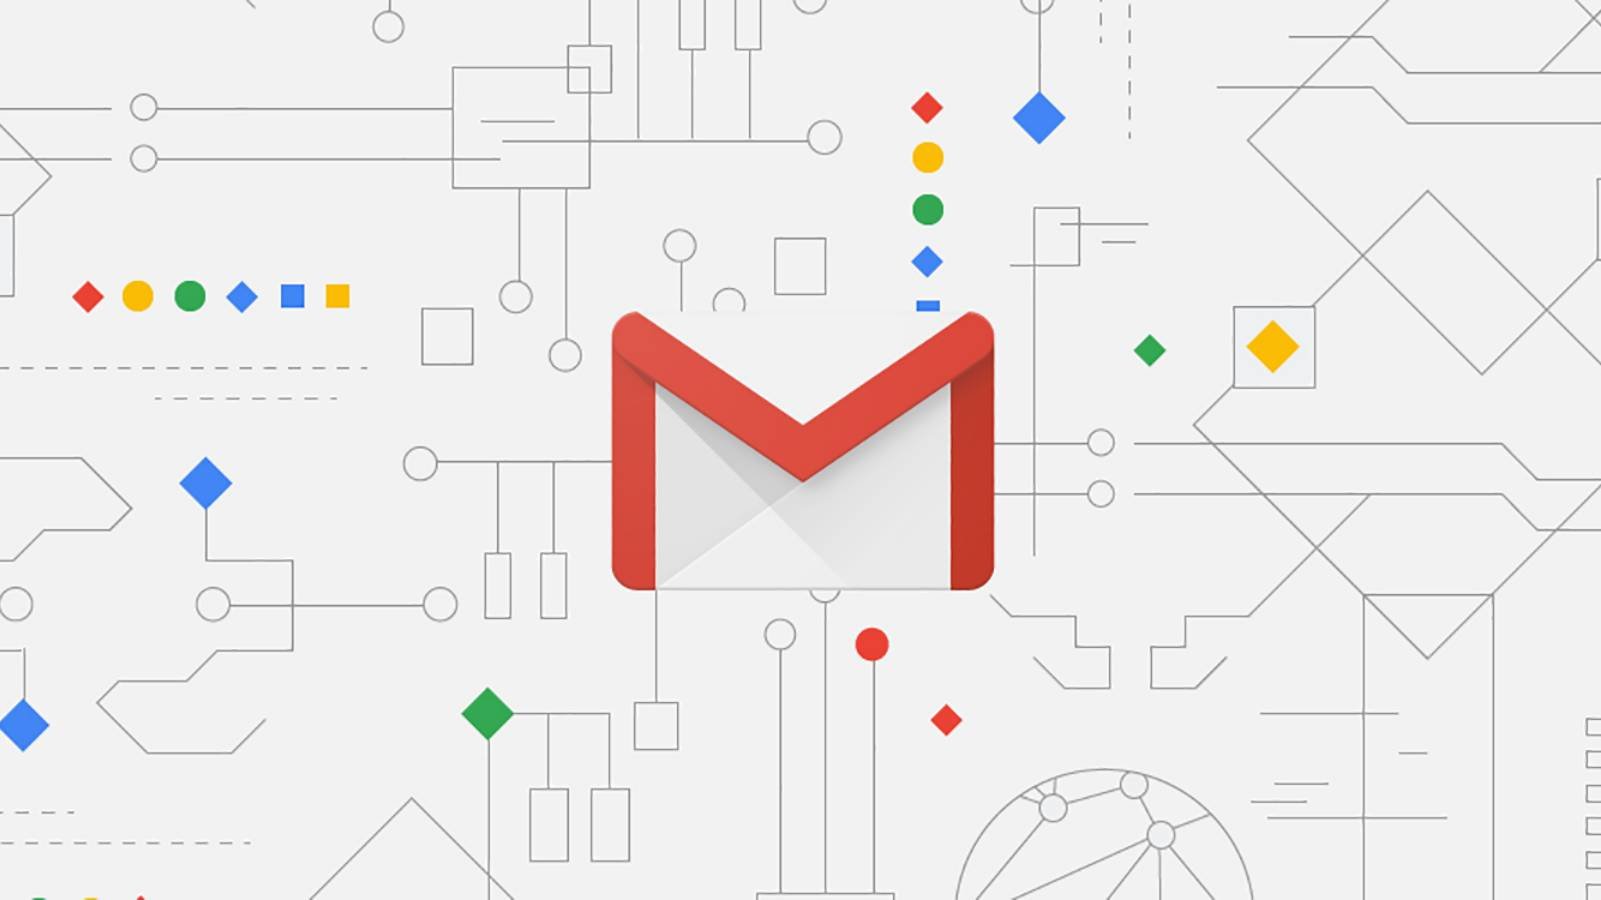 GMAIL Android-animationer